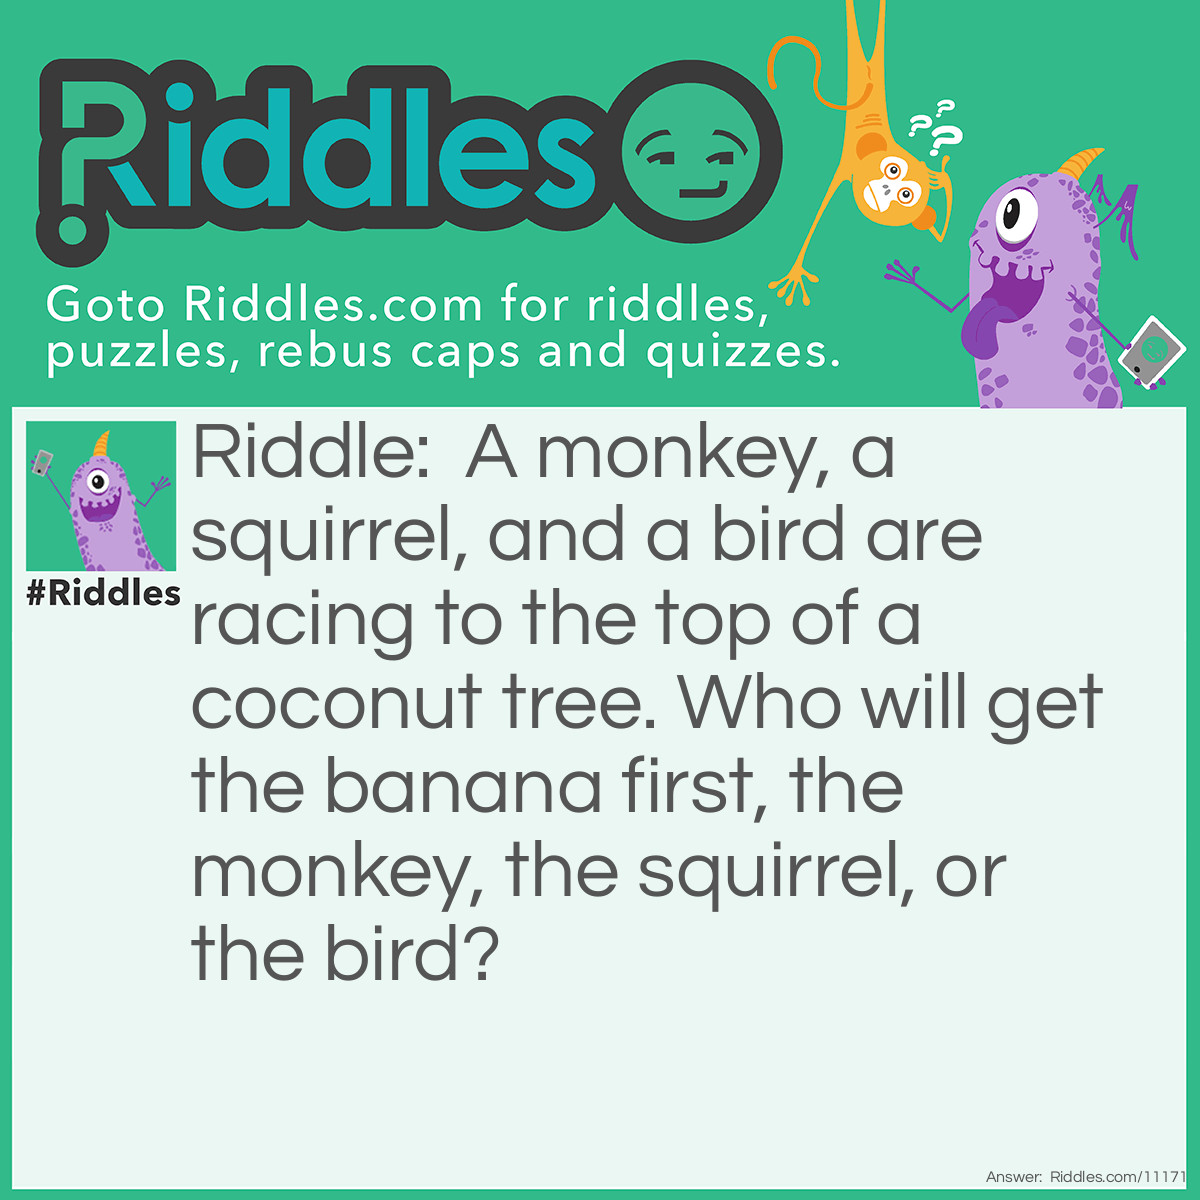 Riddle: A monkey, a squirrel, and a bird are racing to the top of a coconut tree. Who will get the banana first, the monkey, the squirrel, or the bird? Answer: None of them, because you can't get a banana from a coconut tree.